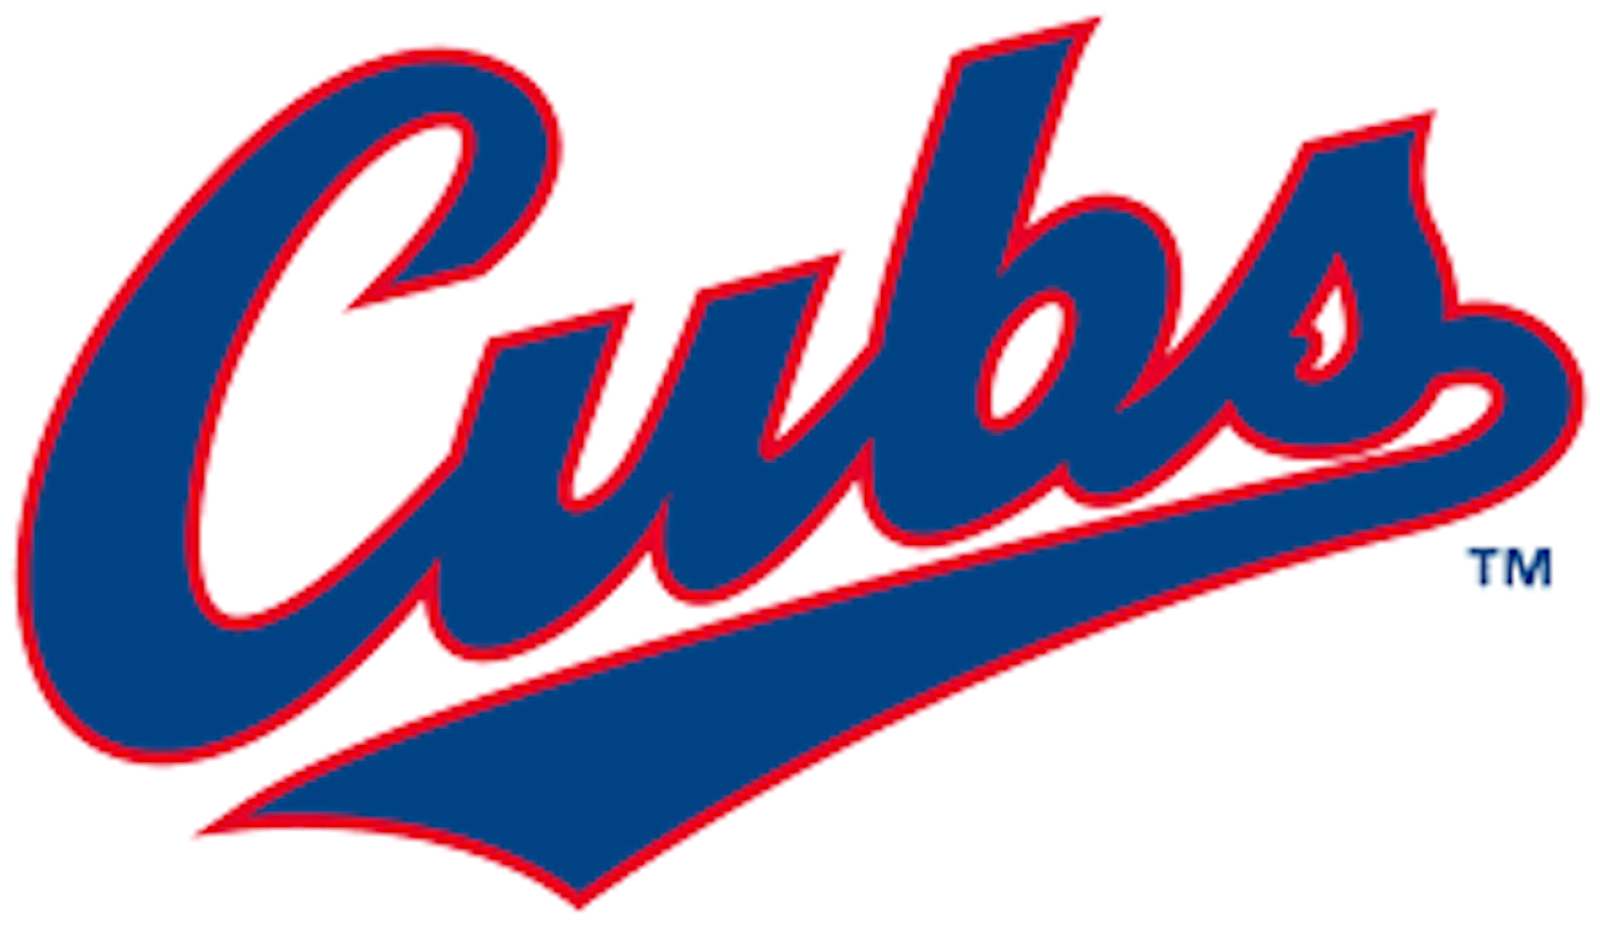 The CHICAGO CUBS